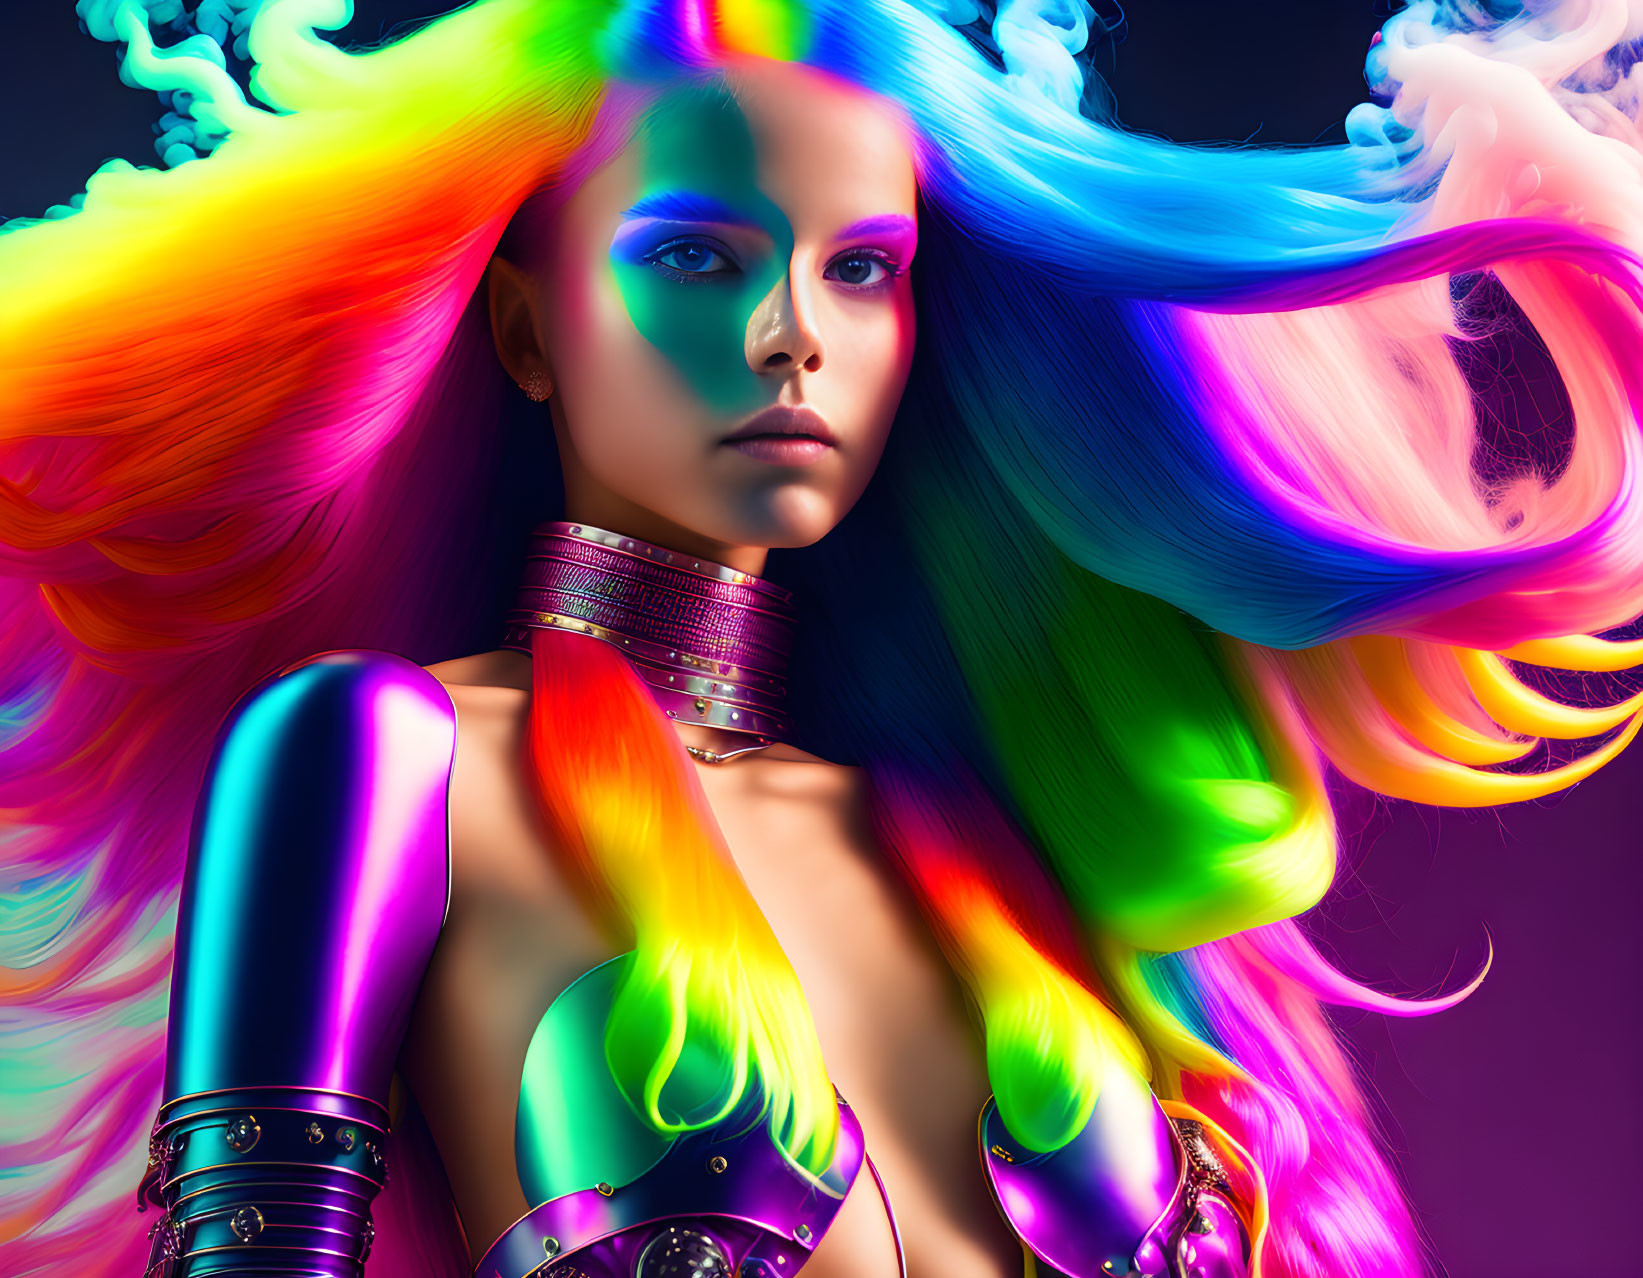 Colorful digital artwork: Woman with flowing rainbow hair and metallic attire on purple background